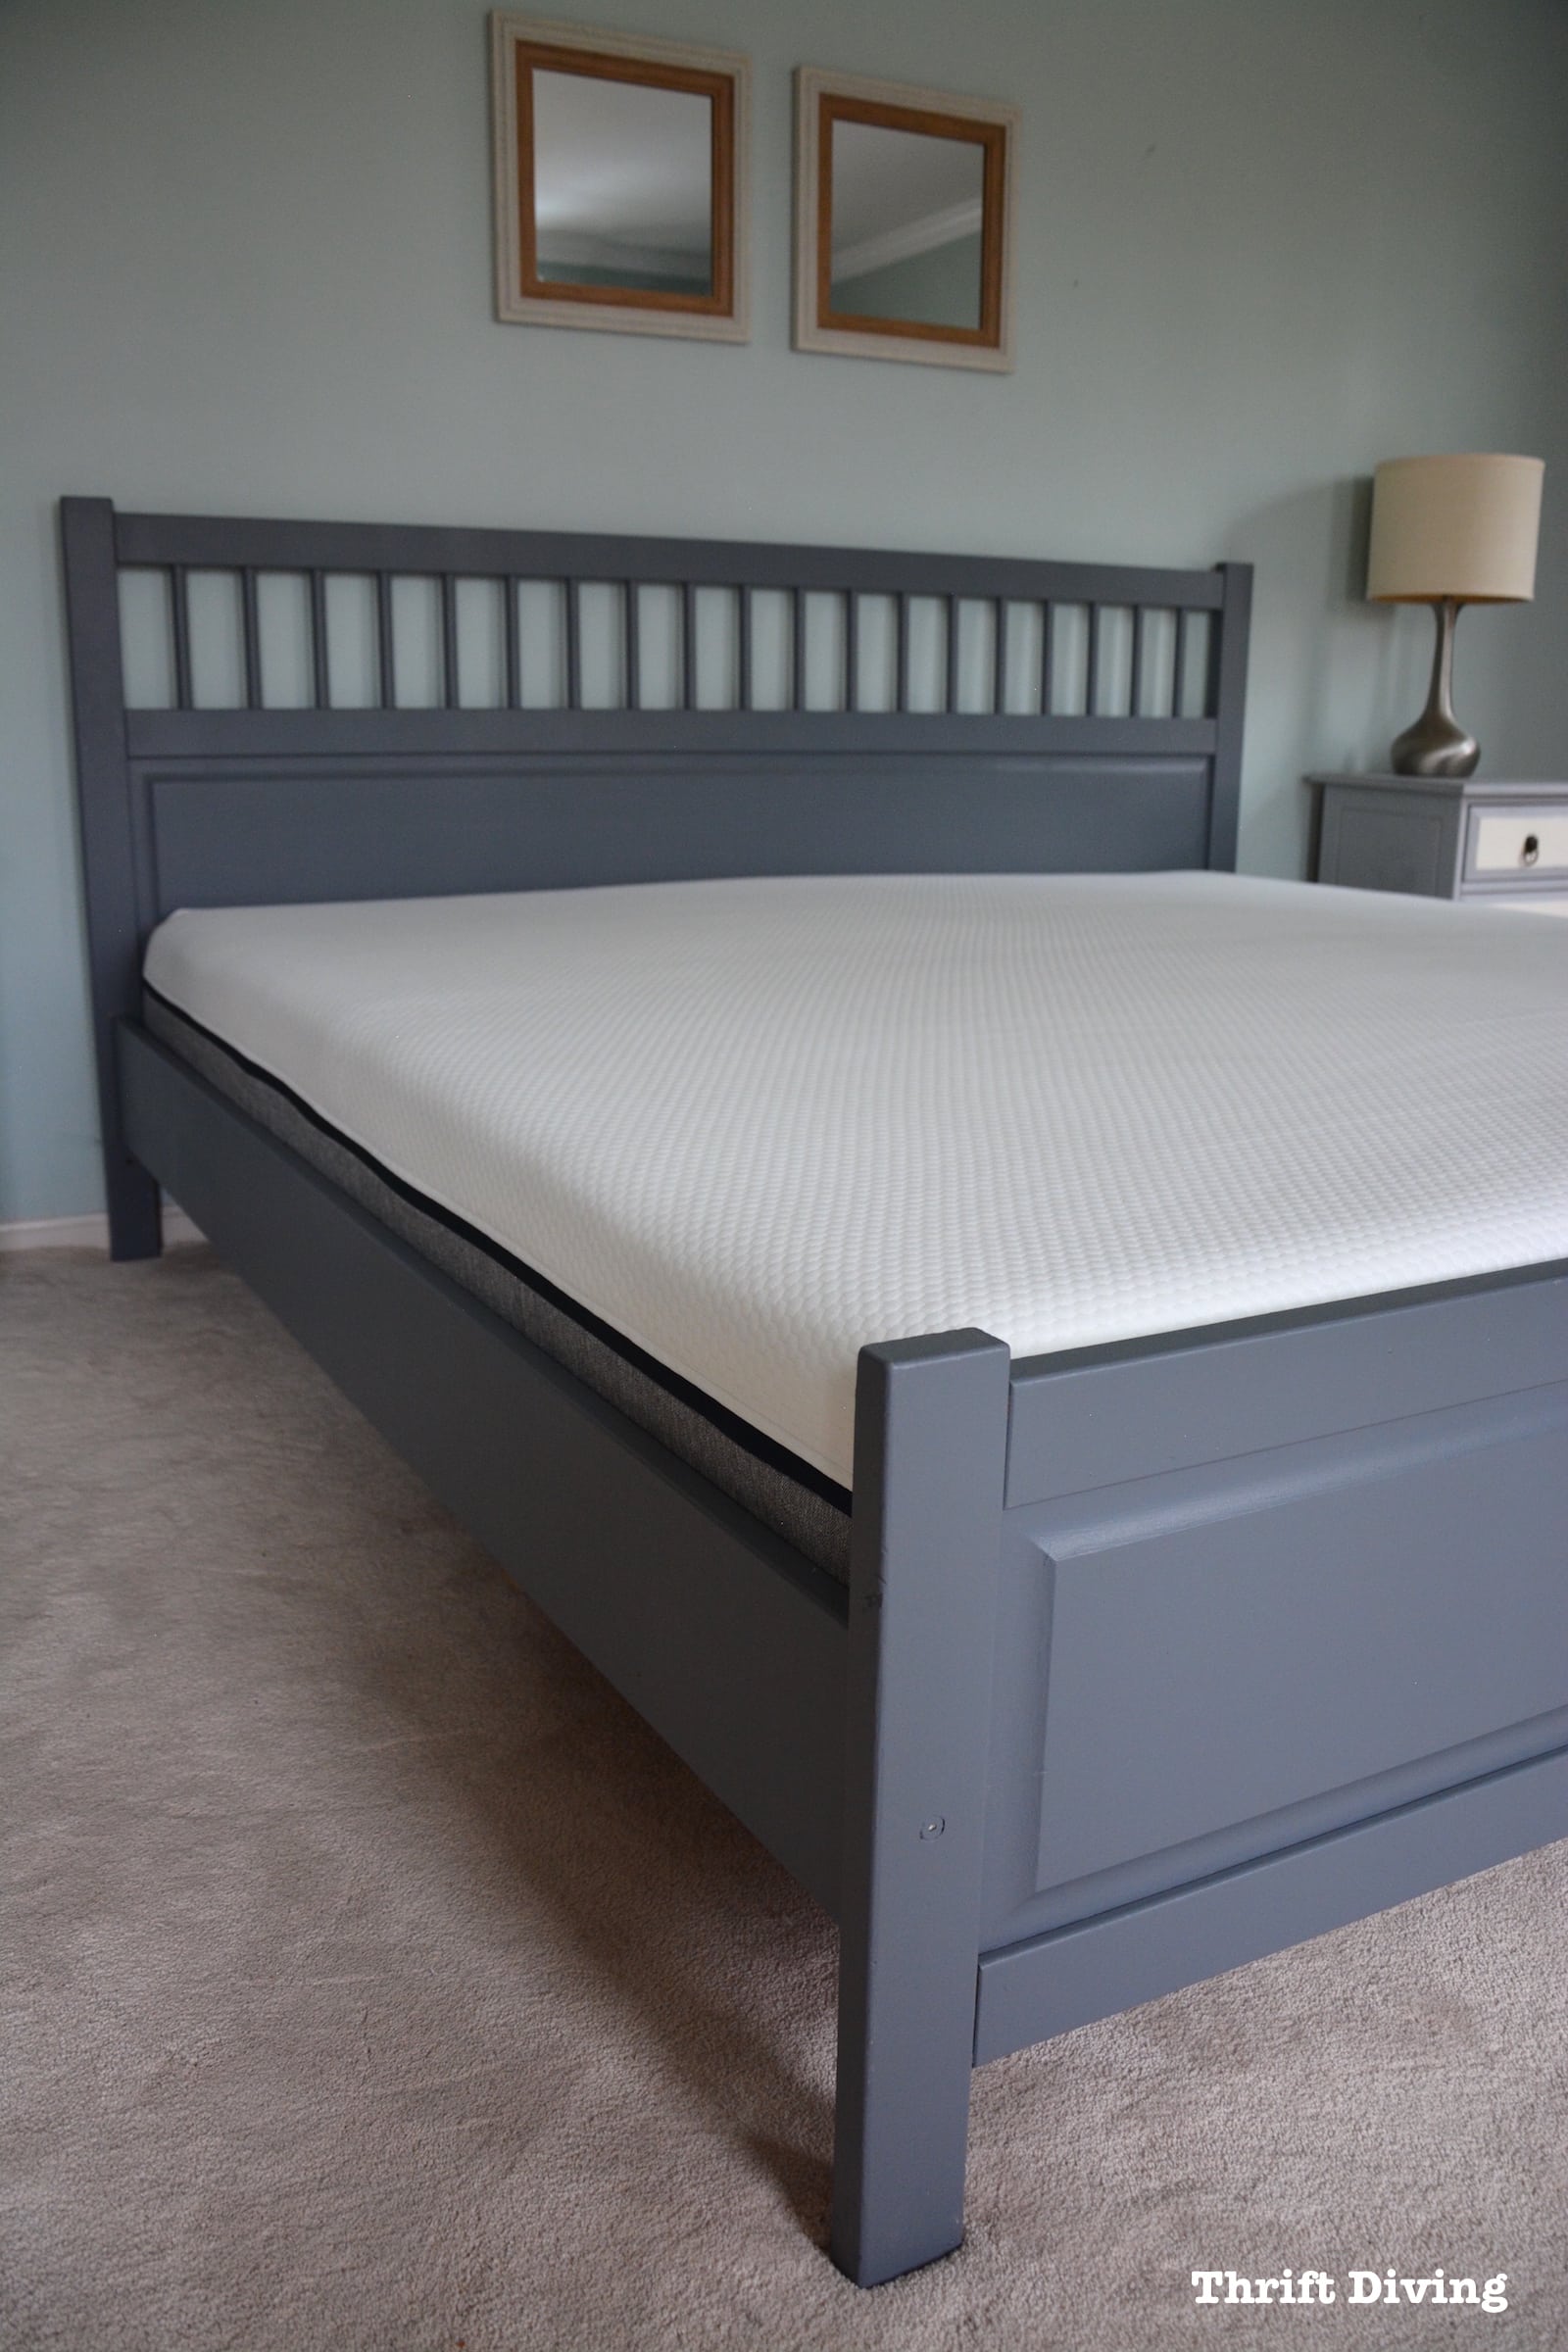 Lull Mattress Review and painted IKEA bed frame - AFTER - Painted IKEA bed frame. - Thrift Diving